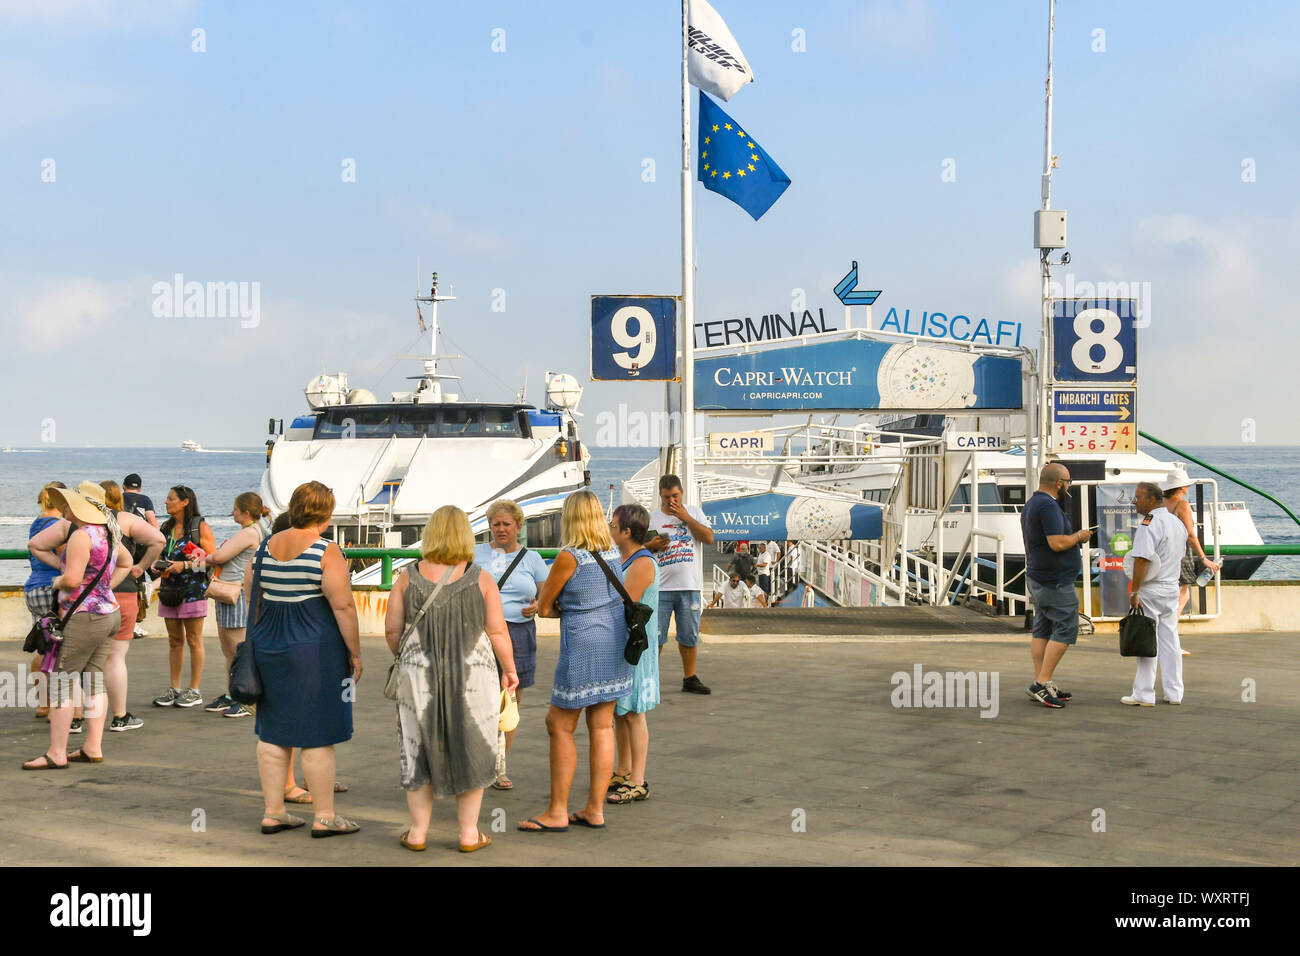 SORRENTO, ITALY - AUGUST 2019: People waiting to board a fast ferry from Sorrento to the Isle of Capri. Two ferries are docked in the background Stock Photo